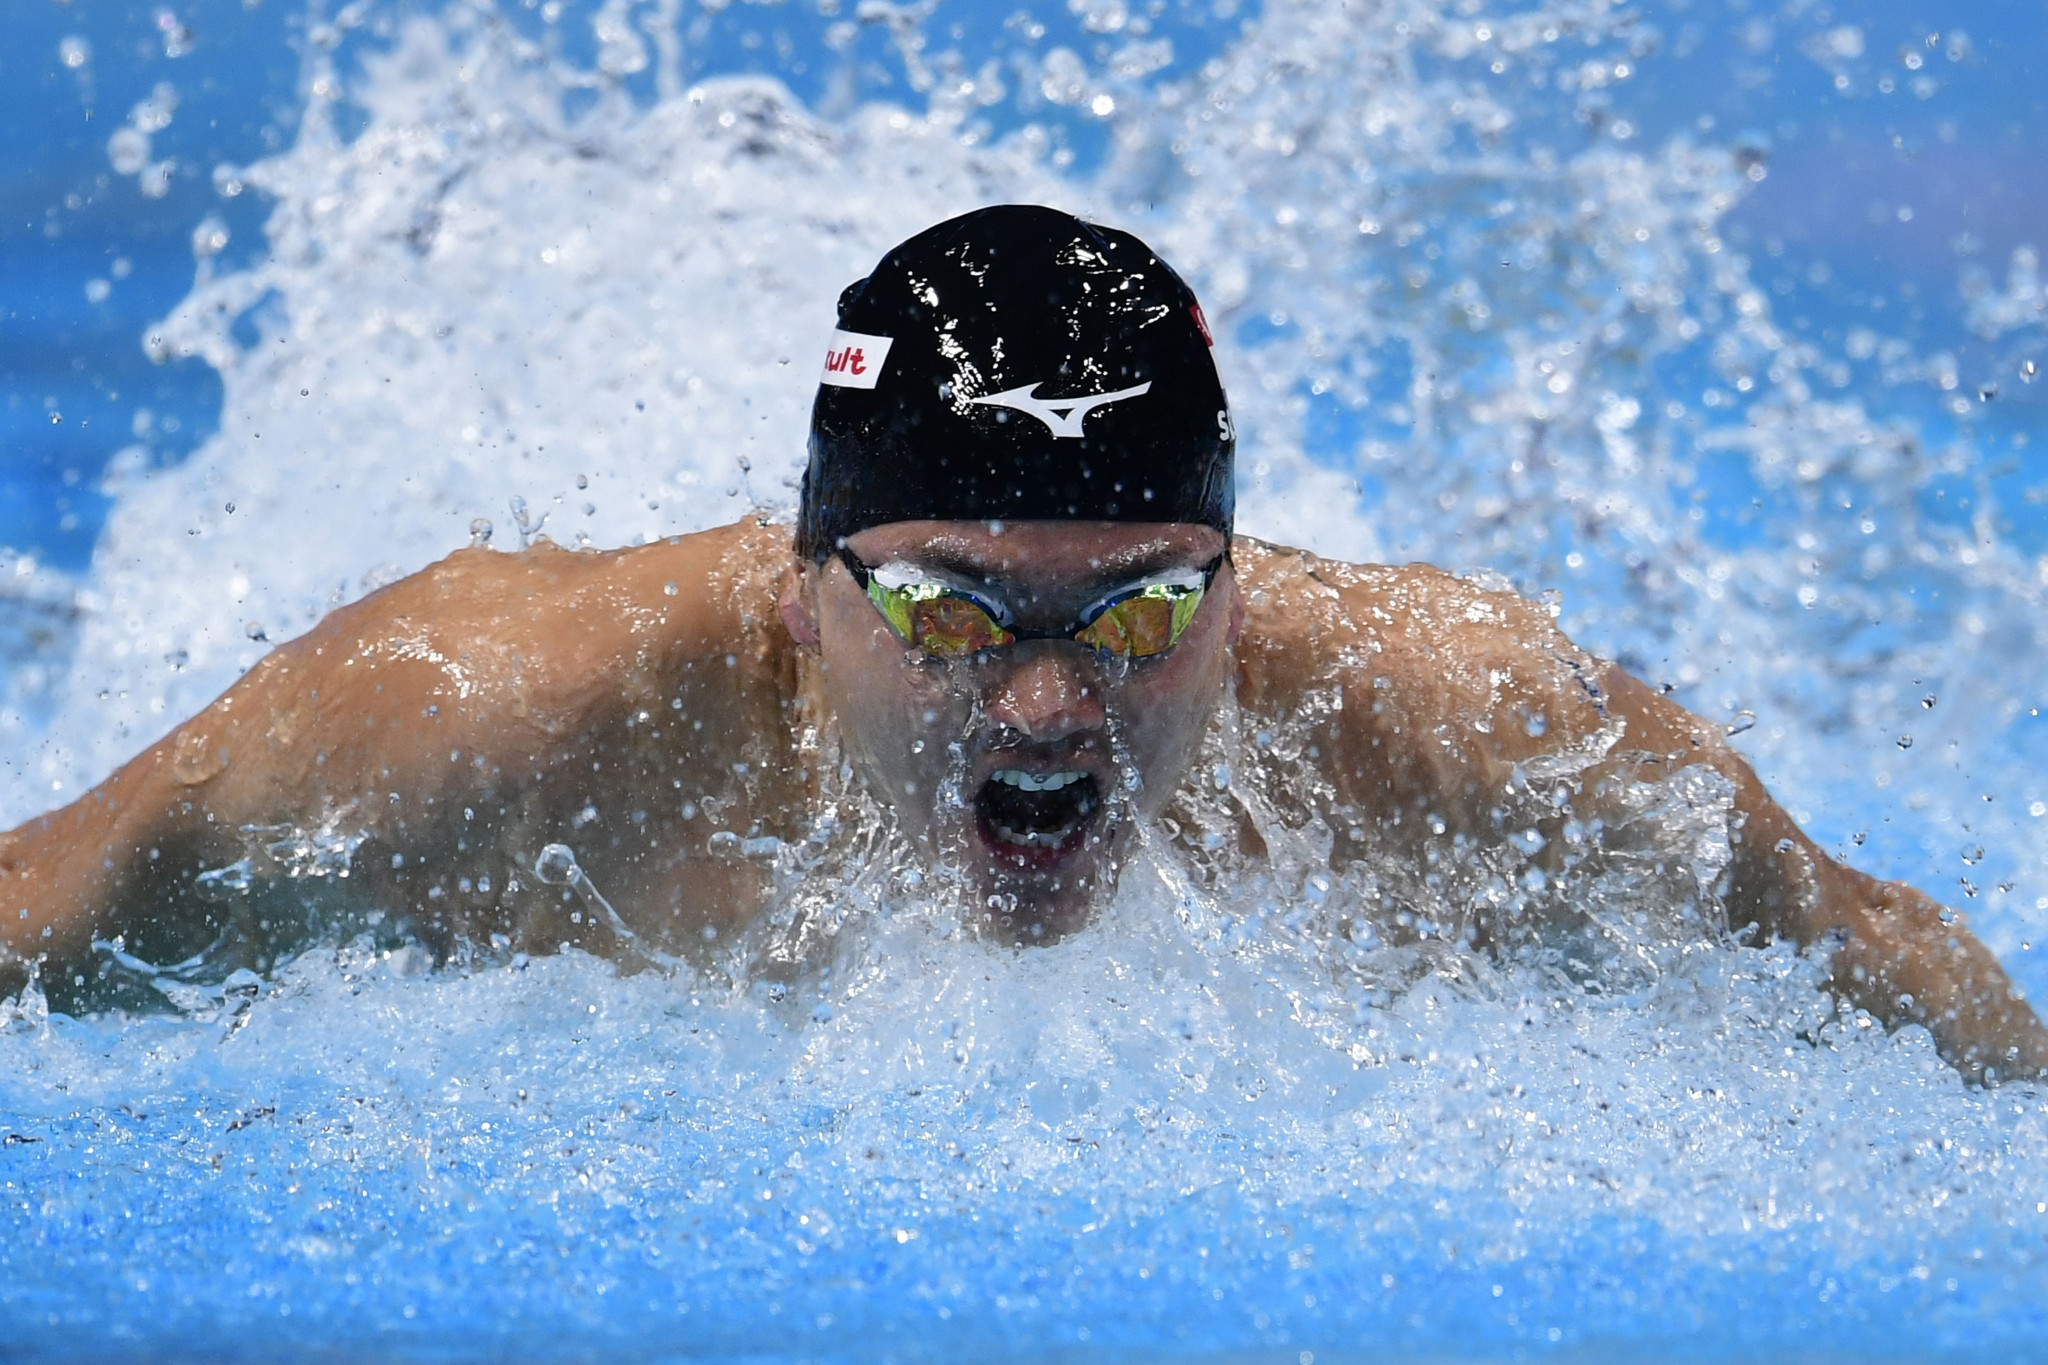 Joseph Schooling won Singapore's first Olympic gold medal in their history, when he finished first in the men's 100 metre butterfly at the Rio 2016 Olympics ©Getty Images